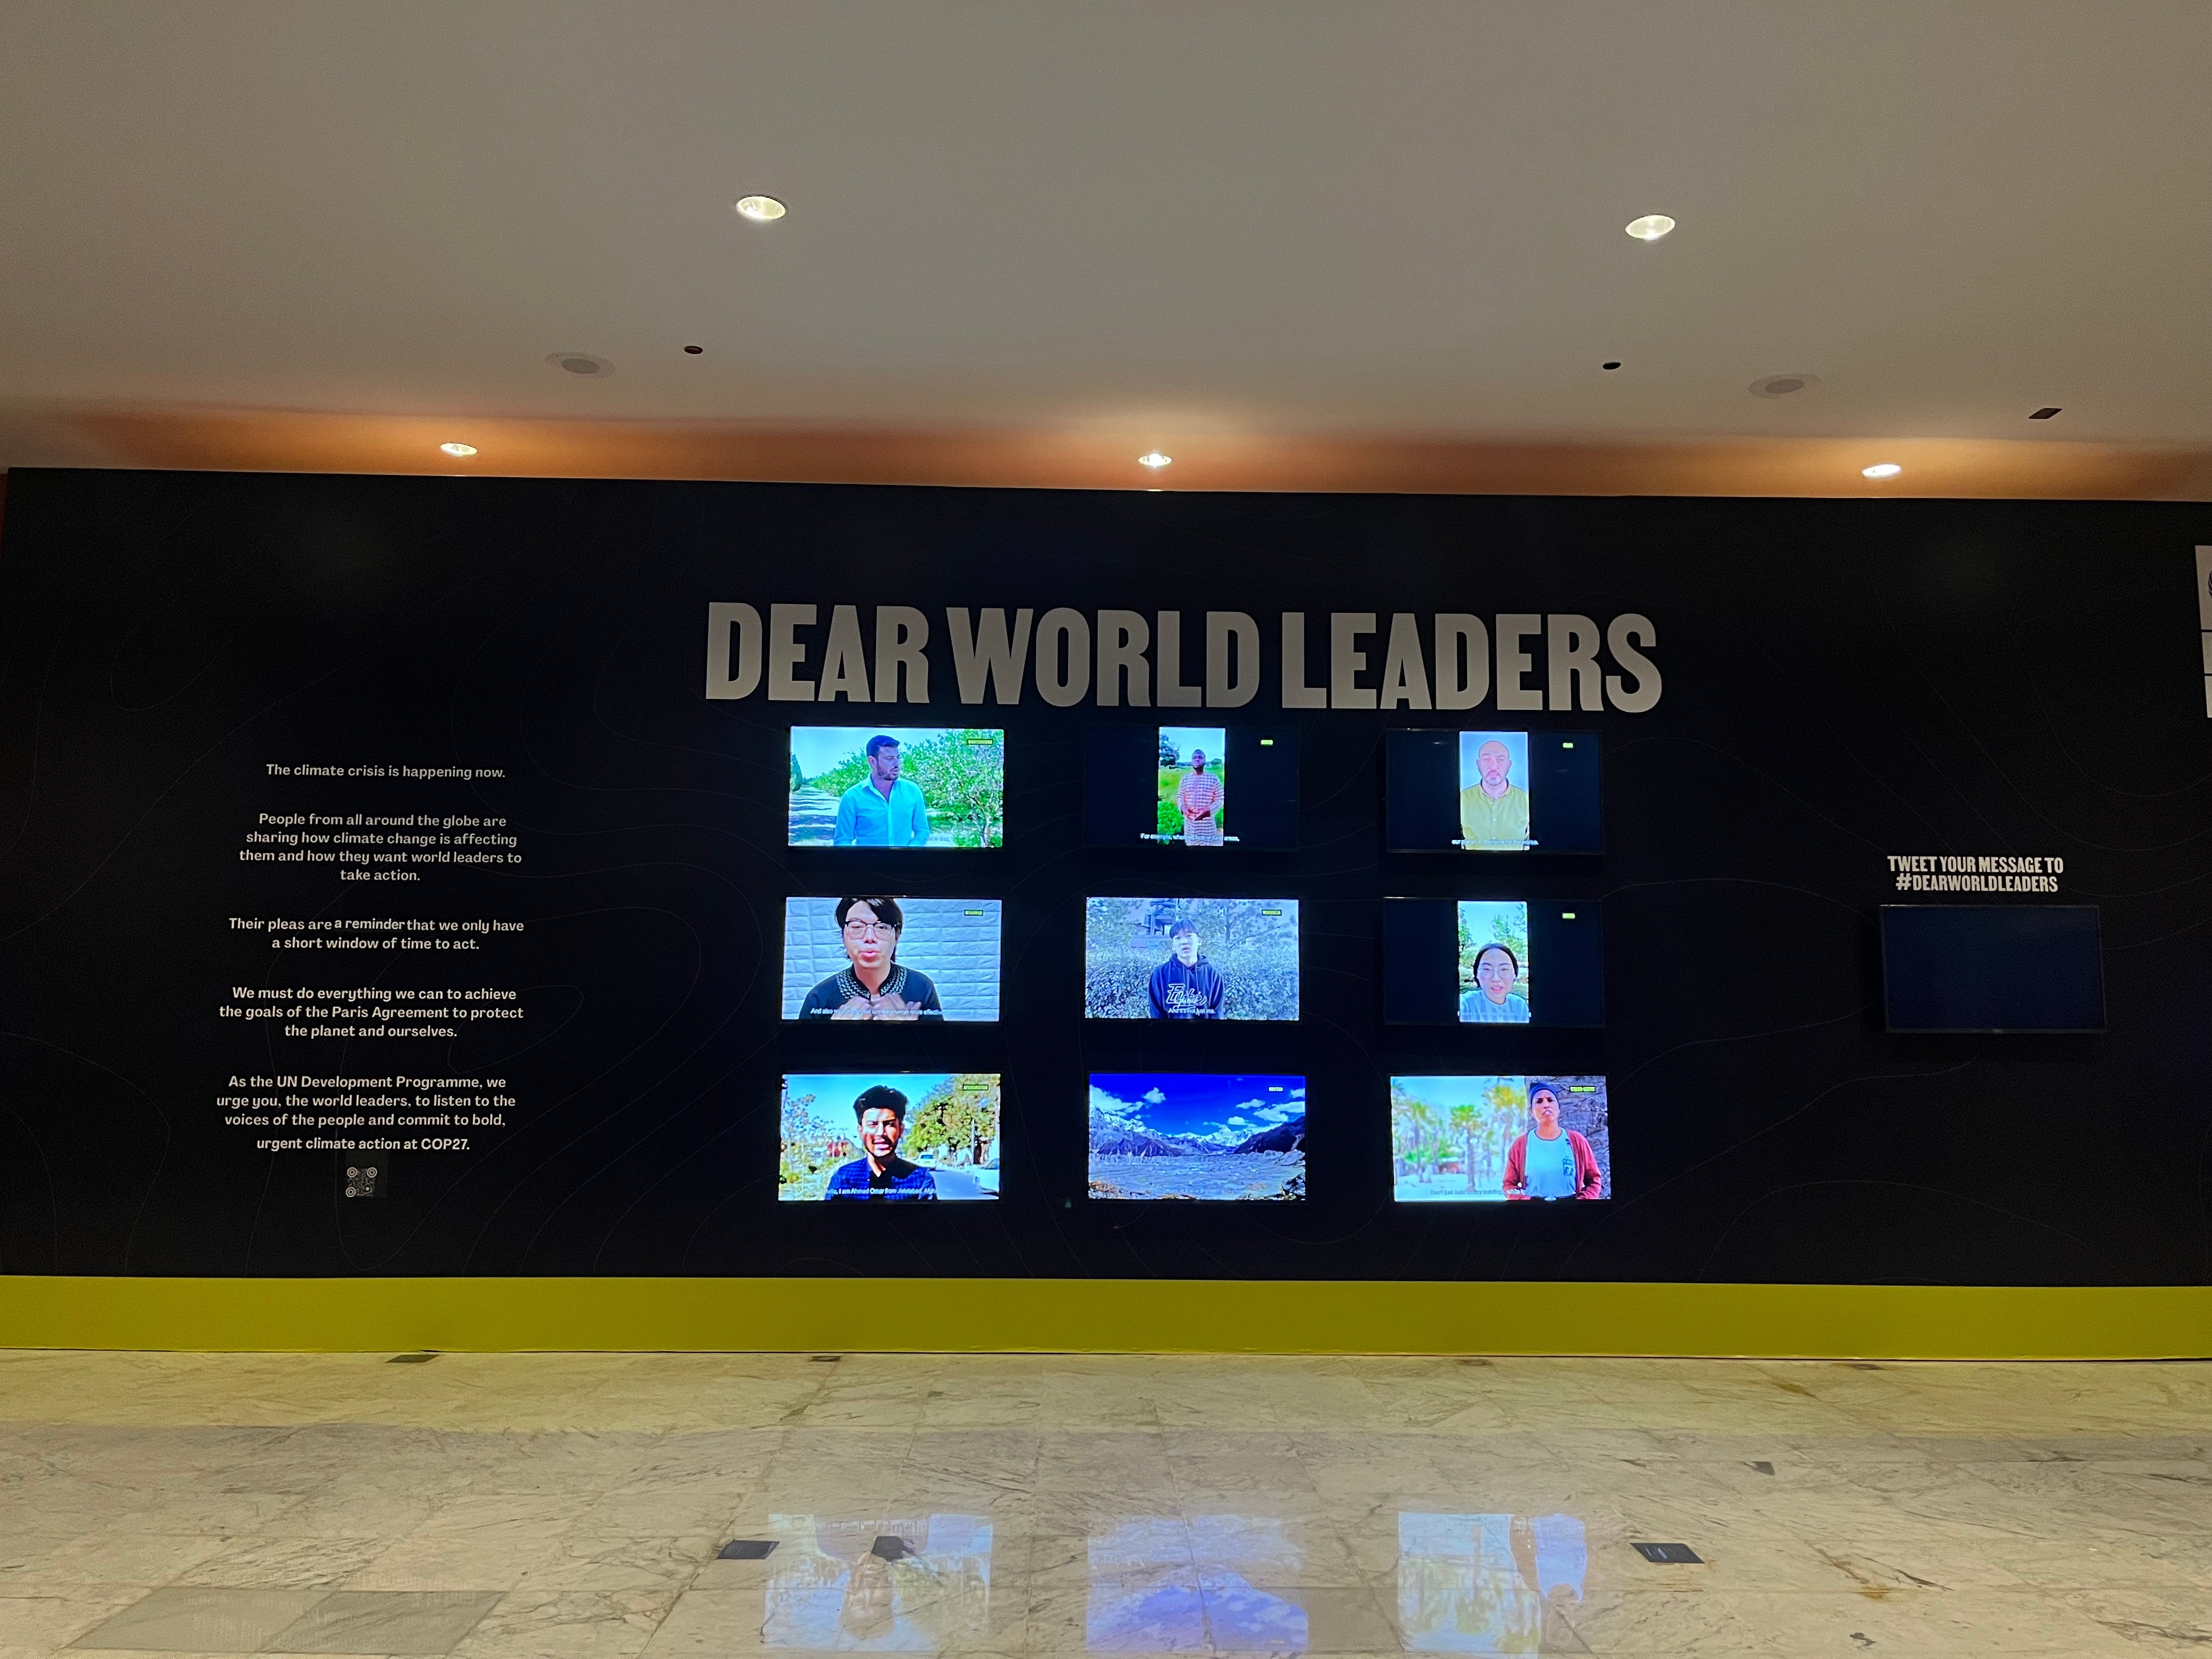 Dear World Leaders video and text display.